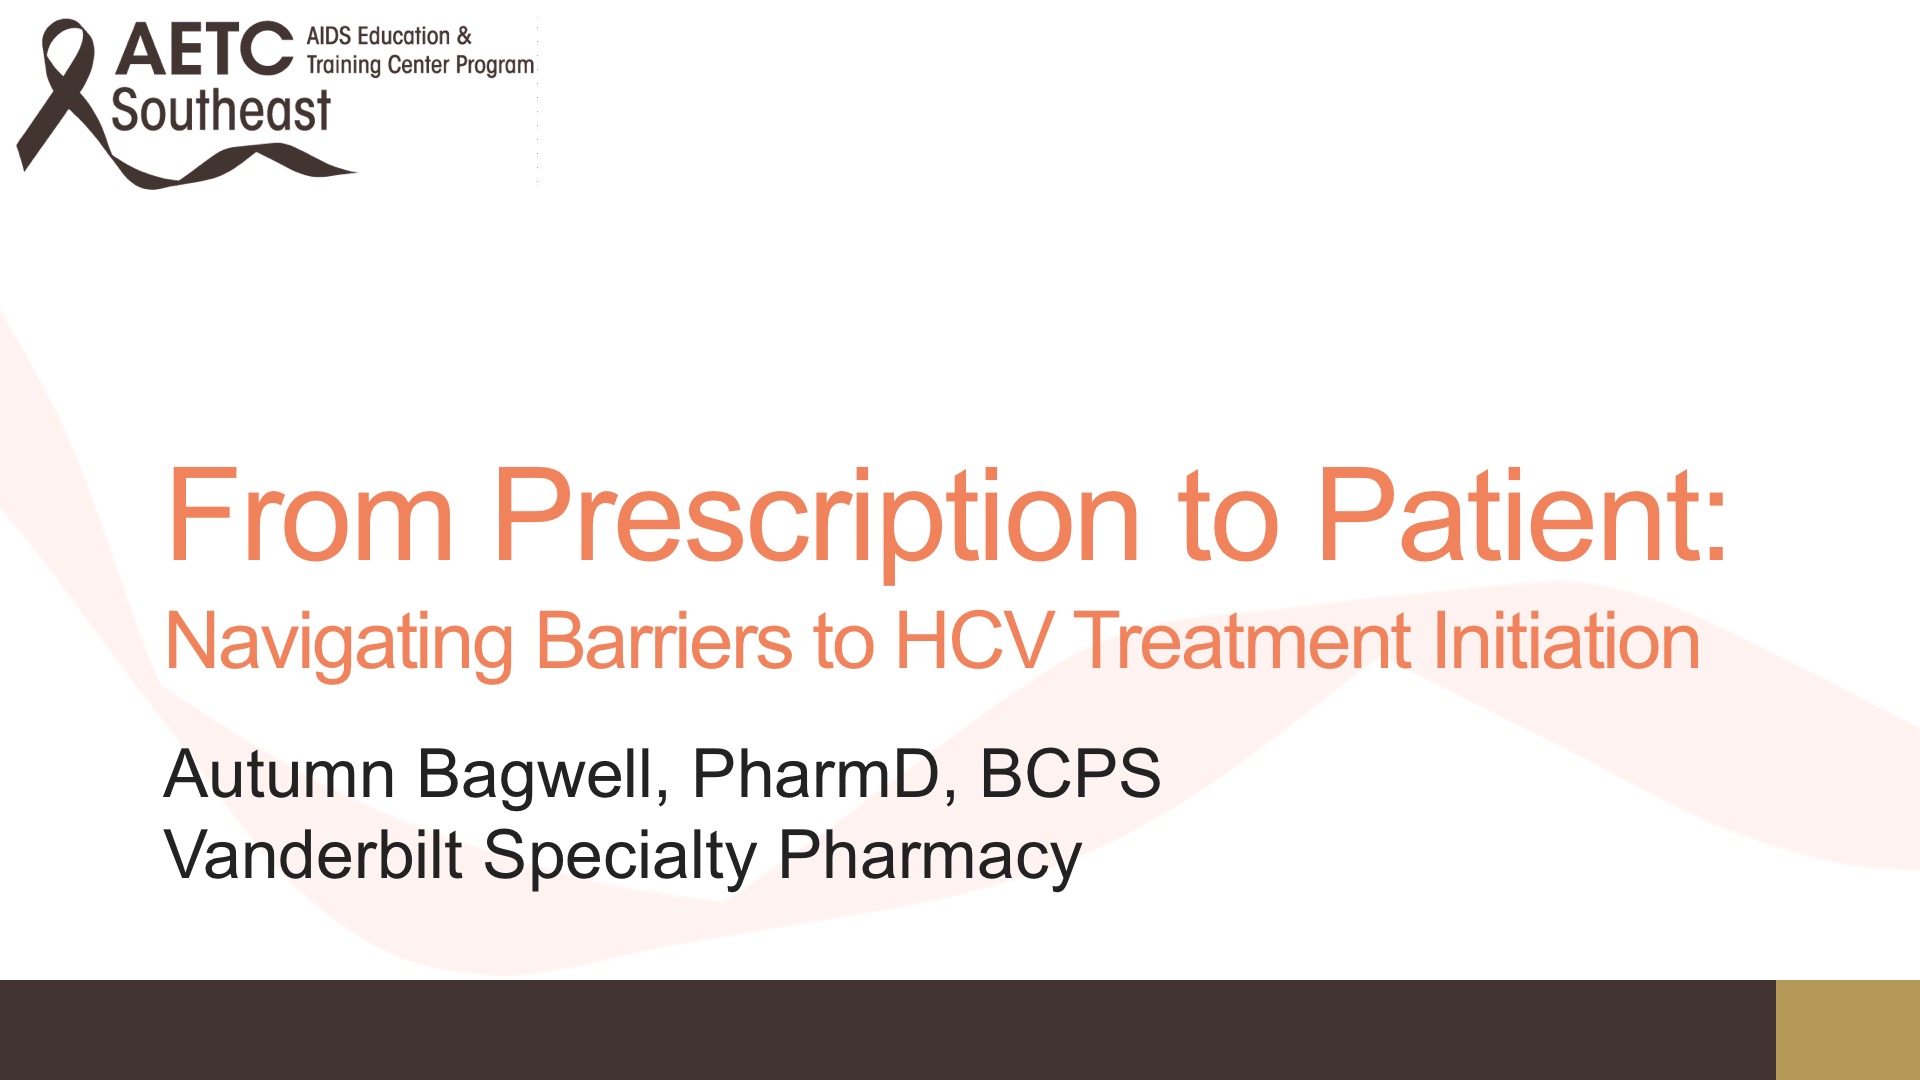 From Prescription to Patient - Navigating Barriers to HCV Treatment Initiation